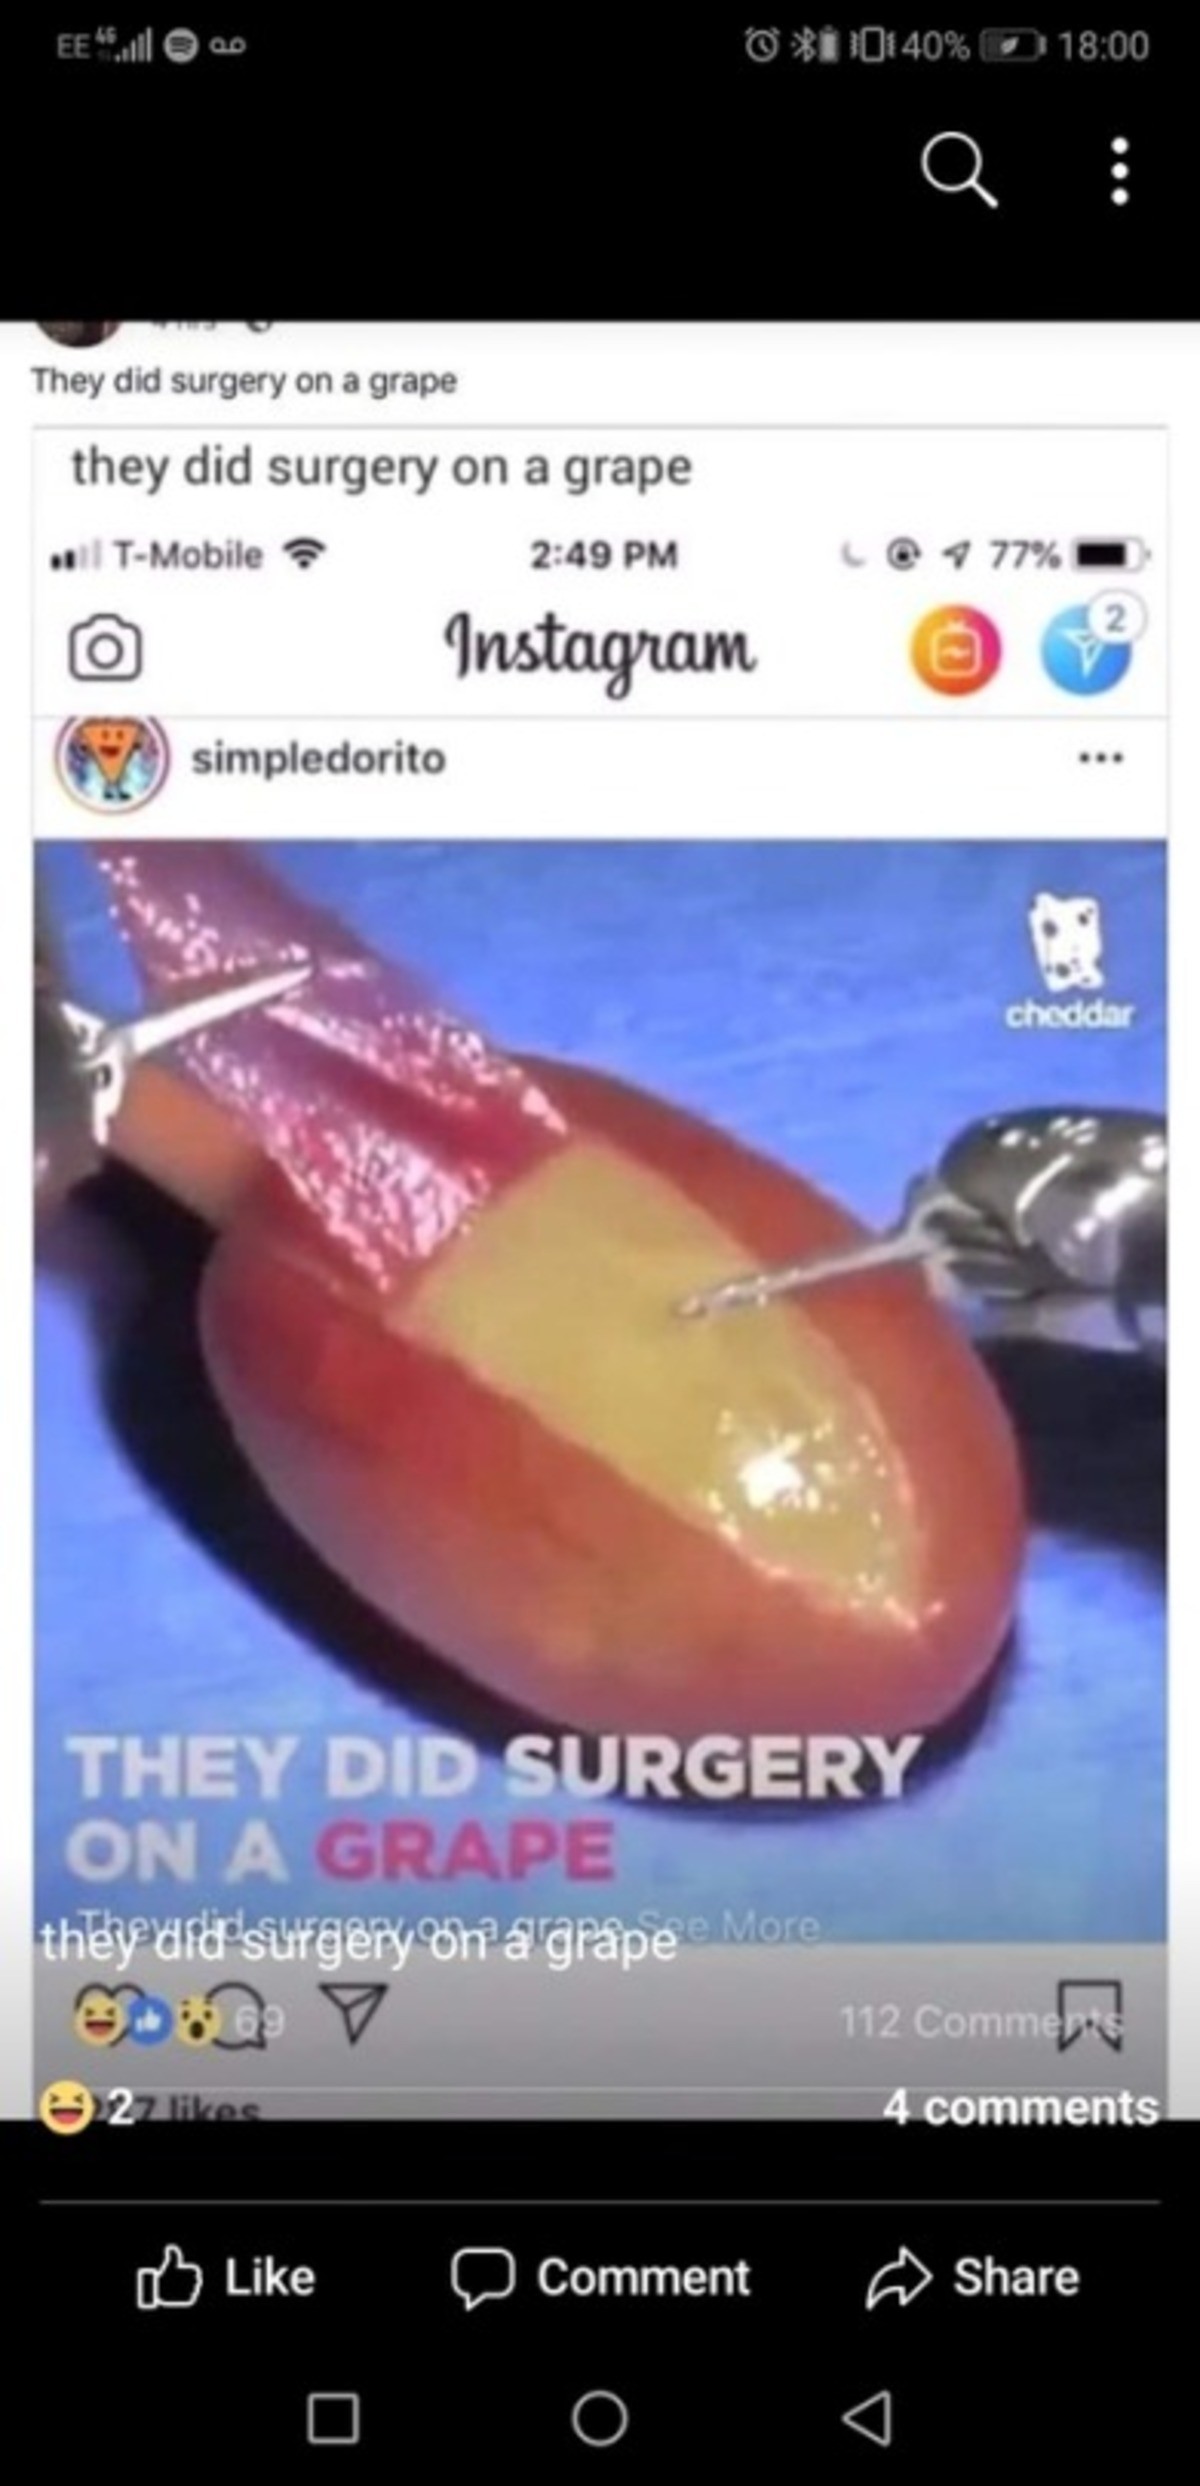 They did surgery on a grape. They did surgery on a grape.. They did this to test the capabilities of some sort of robot surgeon, this is like years old already...